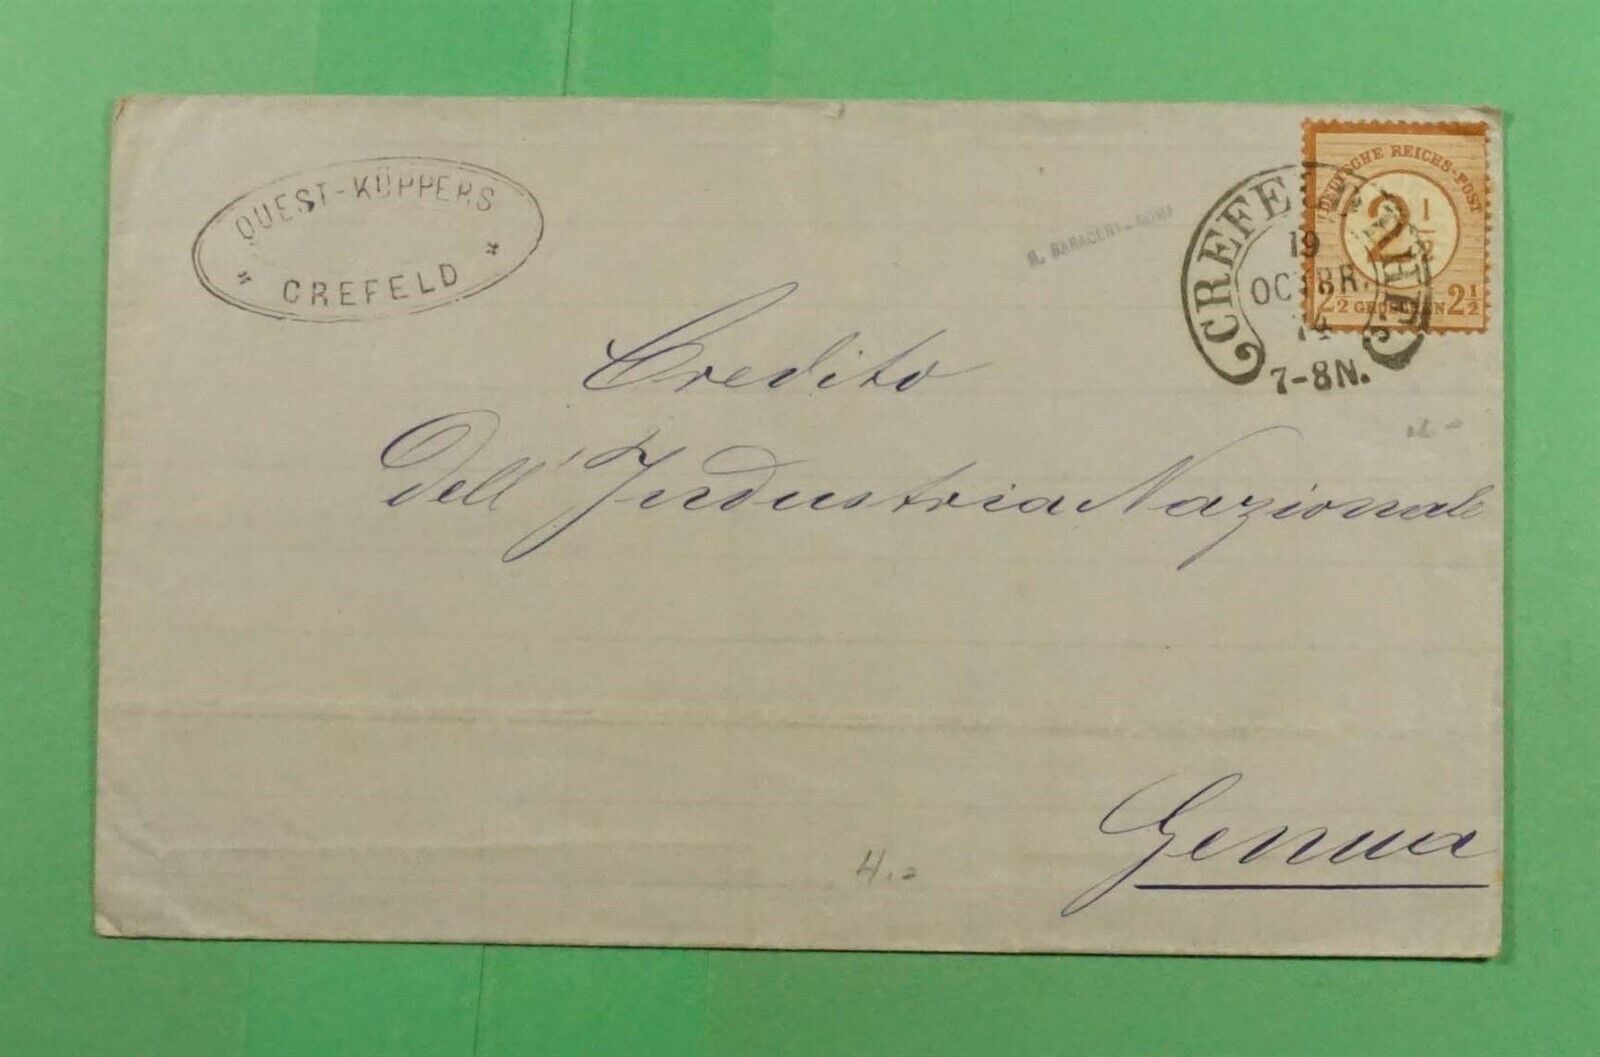 DR WHO 1874 GERMANY FL CREFELD TO ITALY j21168